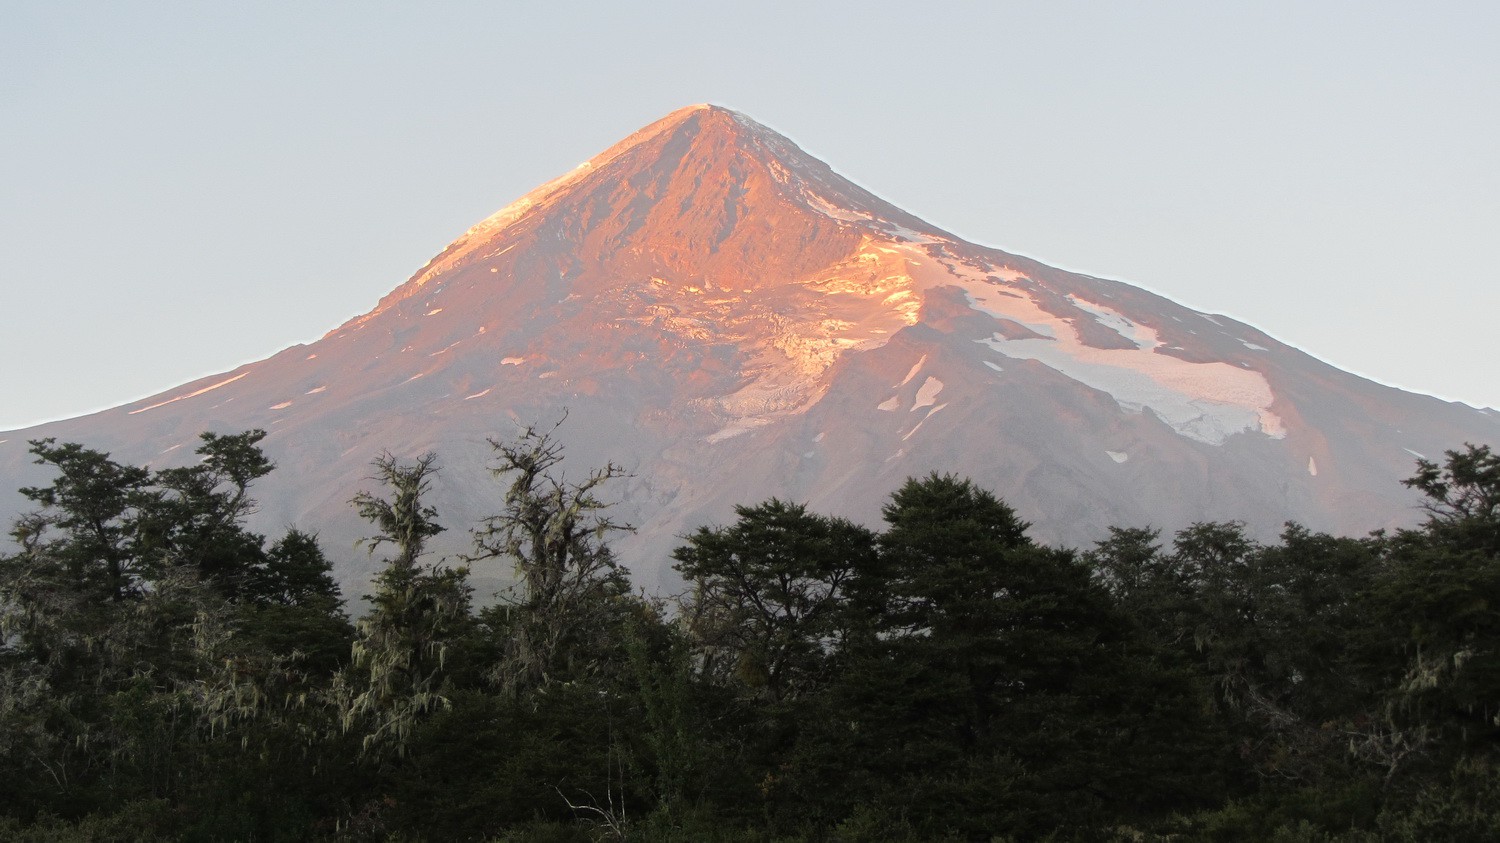 North face of Volcan Lanin seen from the Information Center at Paso de Mamuil Malal